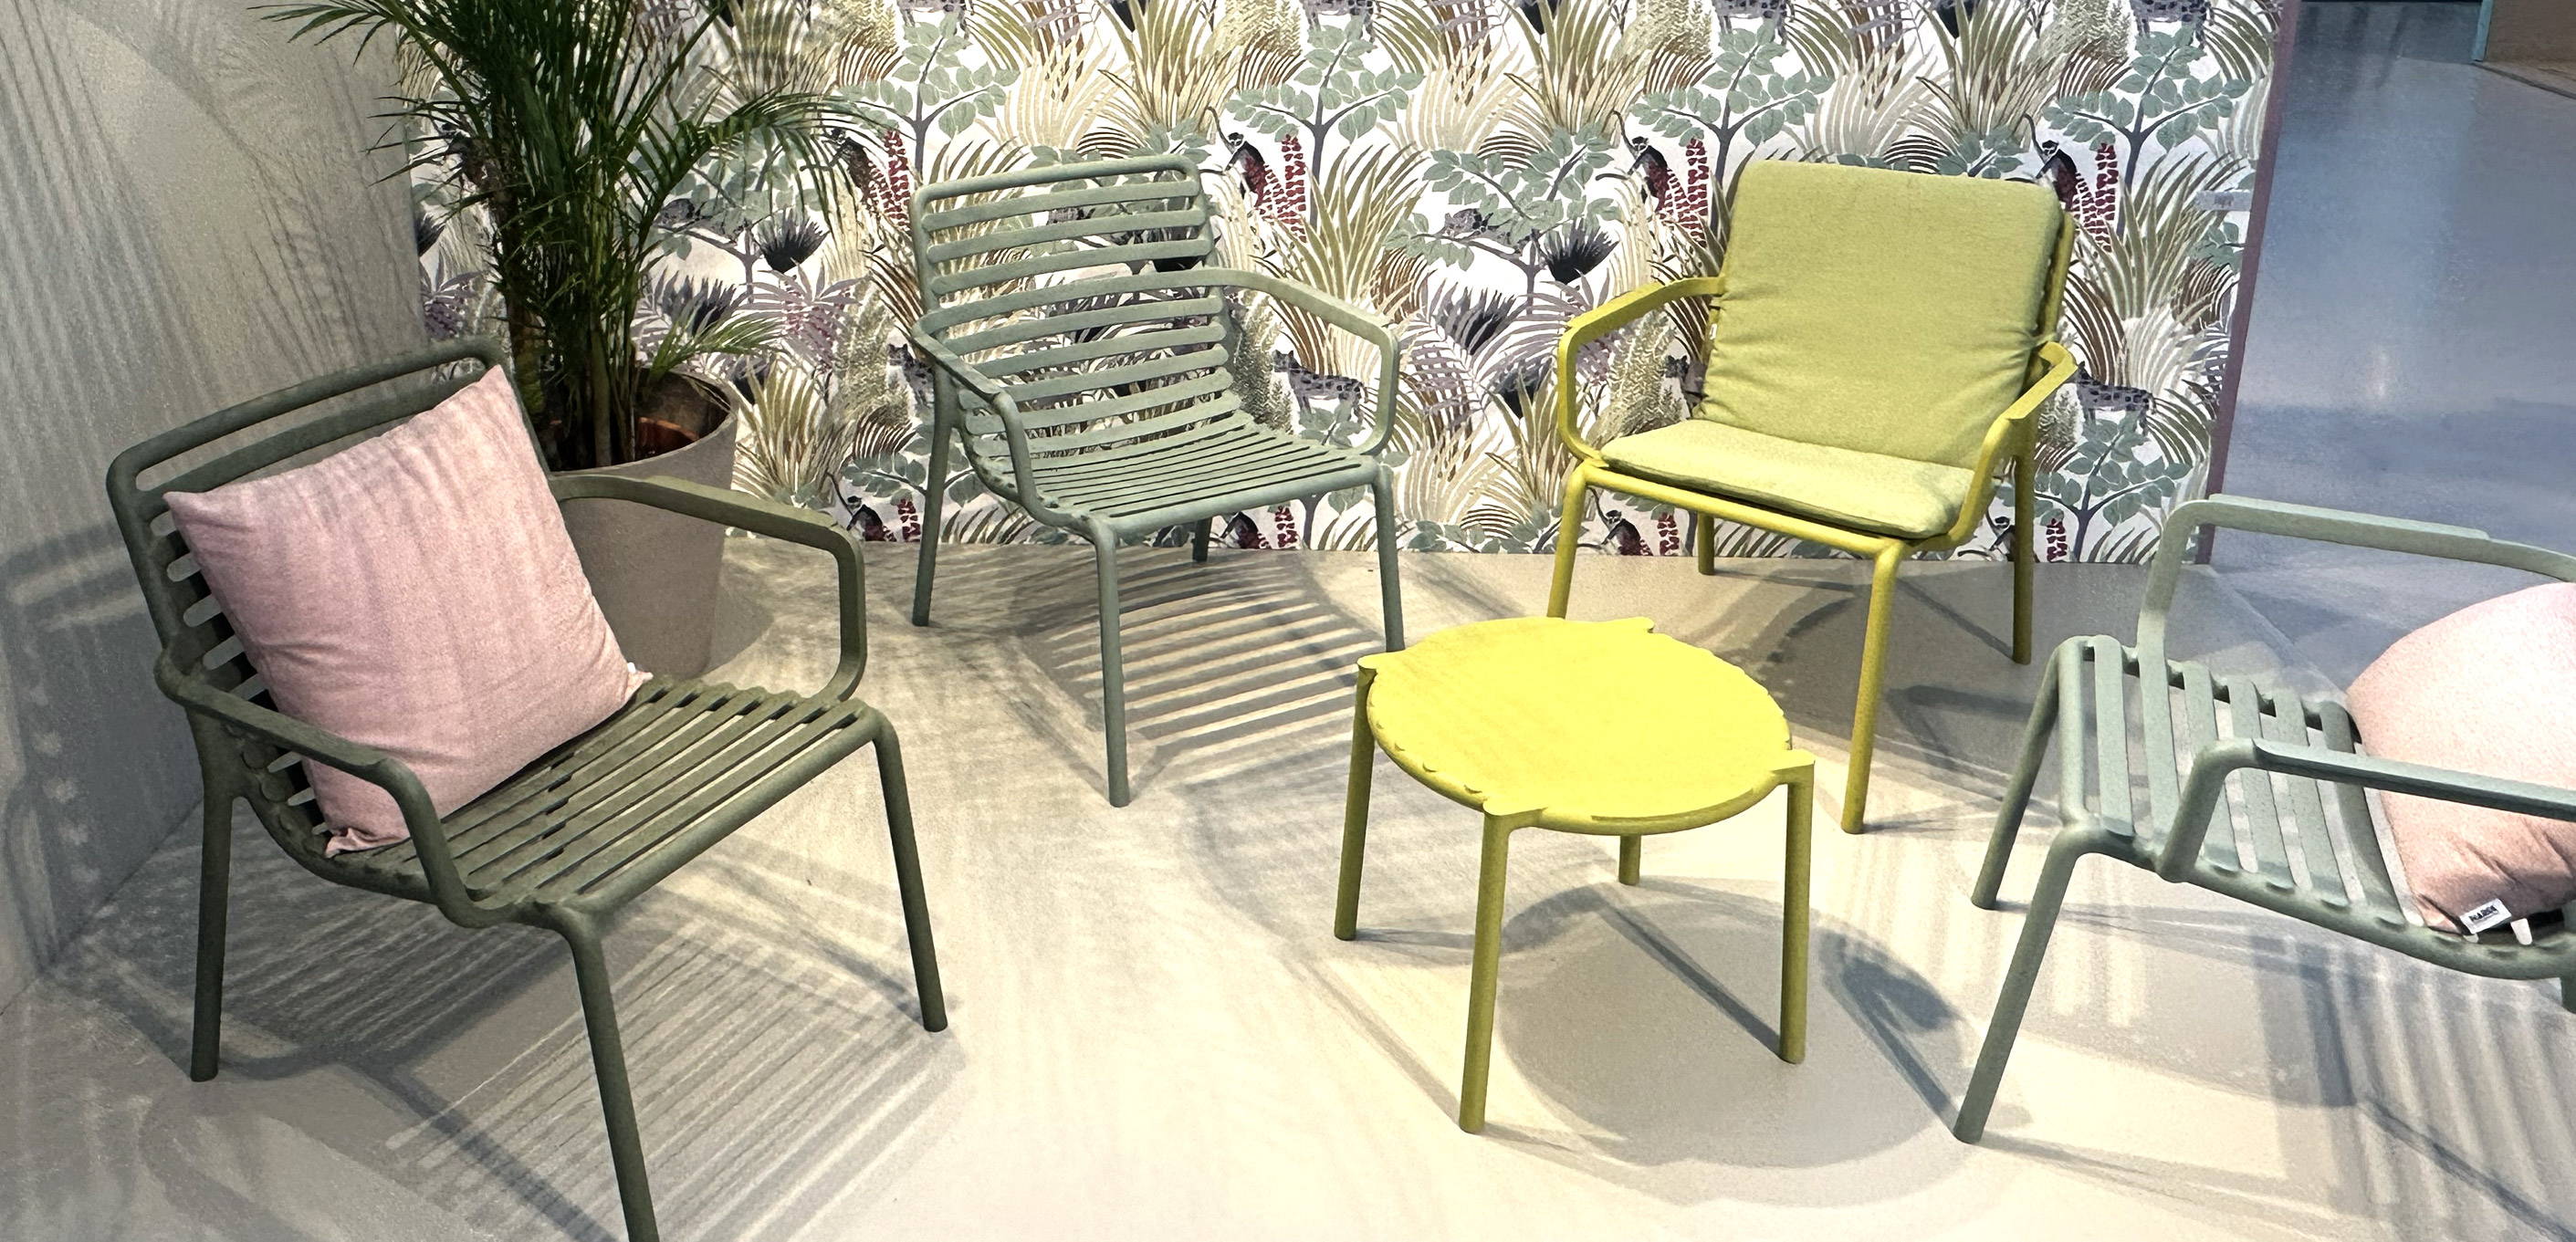 Doga Garden Chairs - Recycled And Made By Nardi, Italy